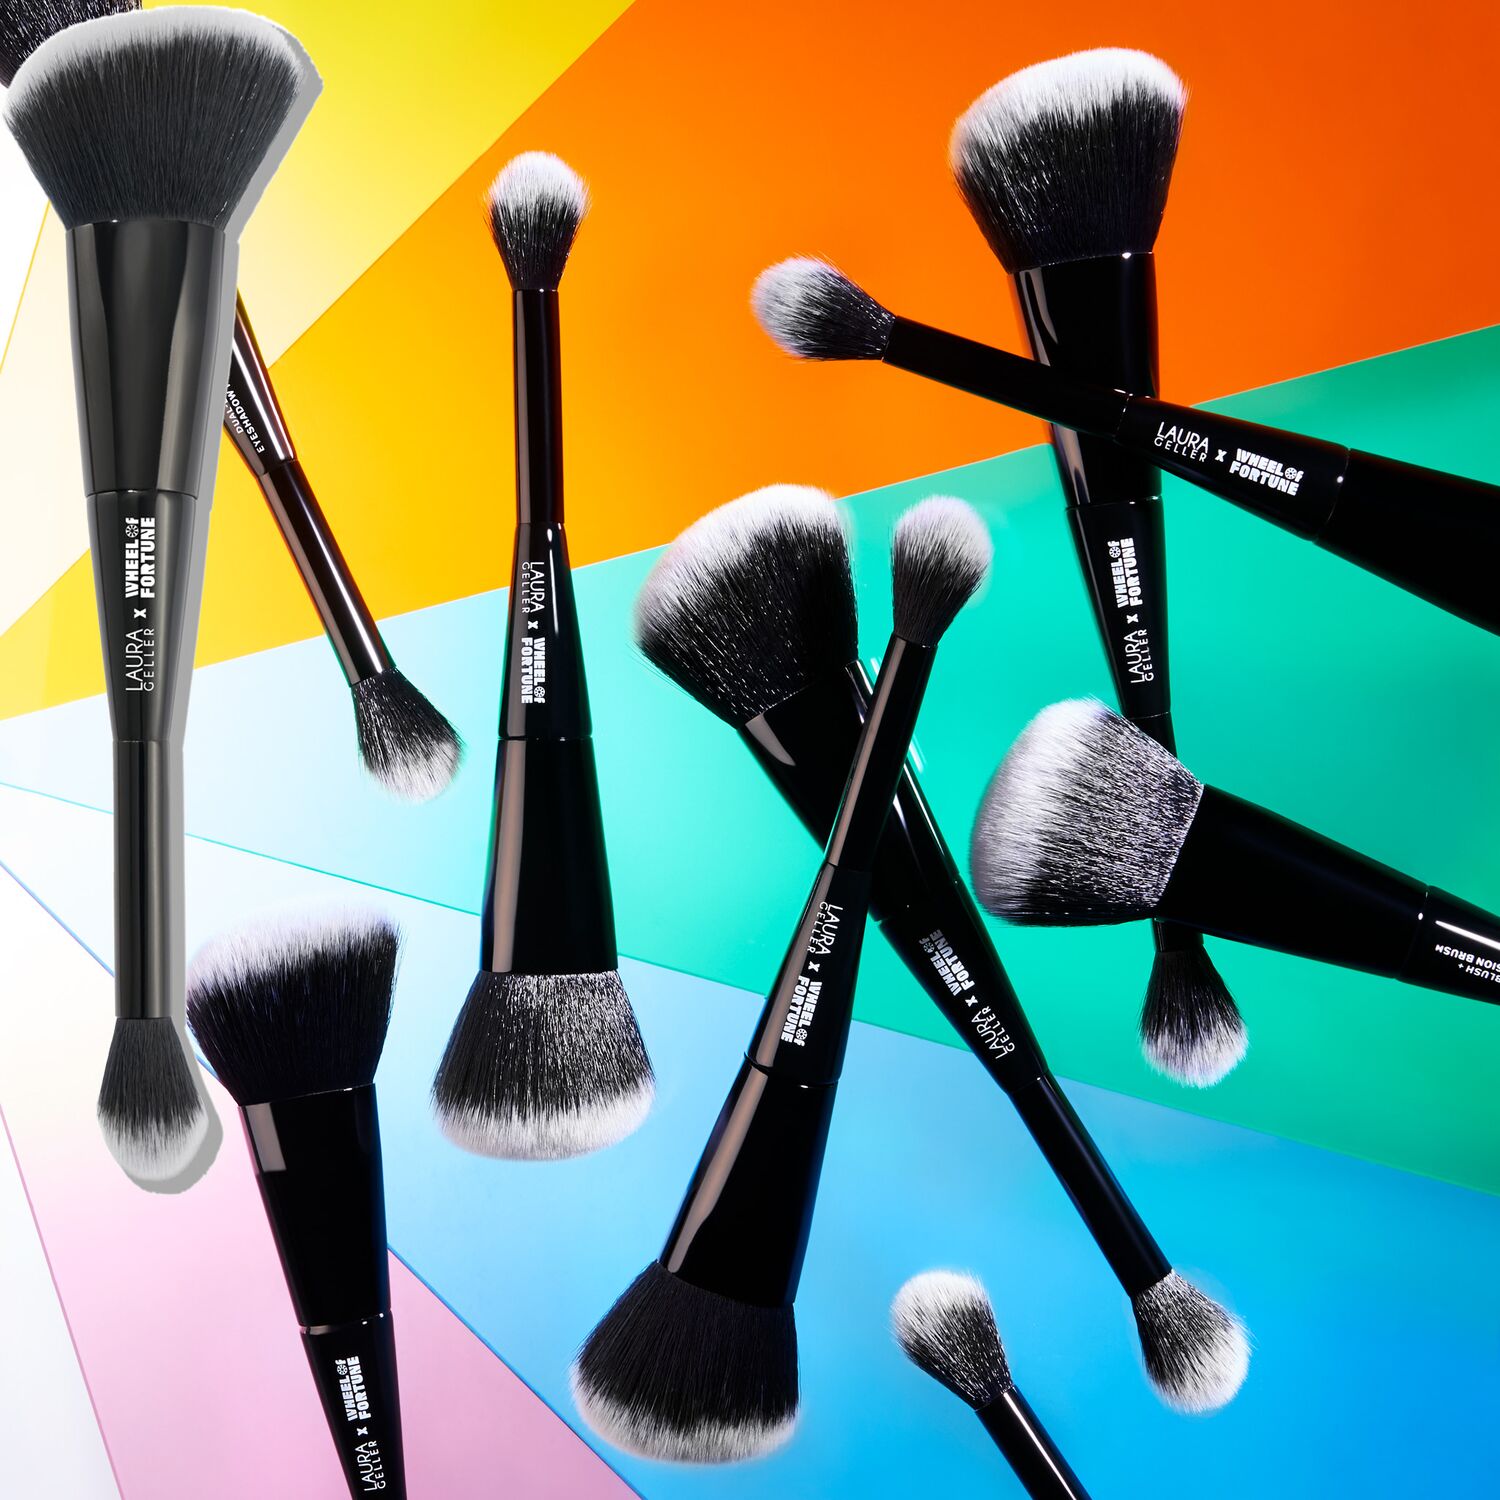 Dry Brush Set - 4 Brushes of different size | CobaltKeep